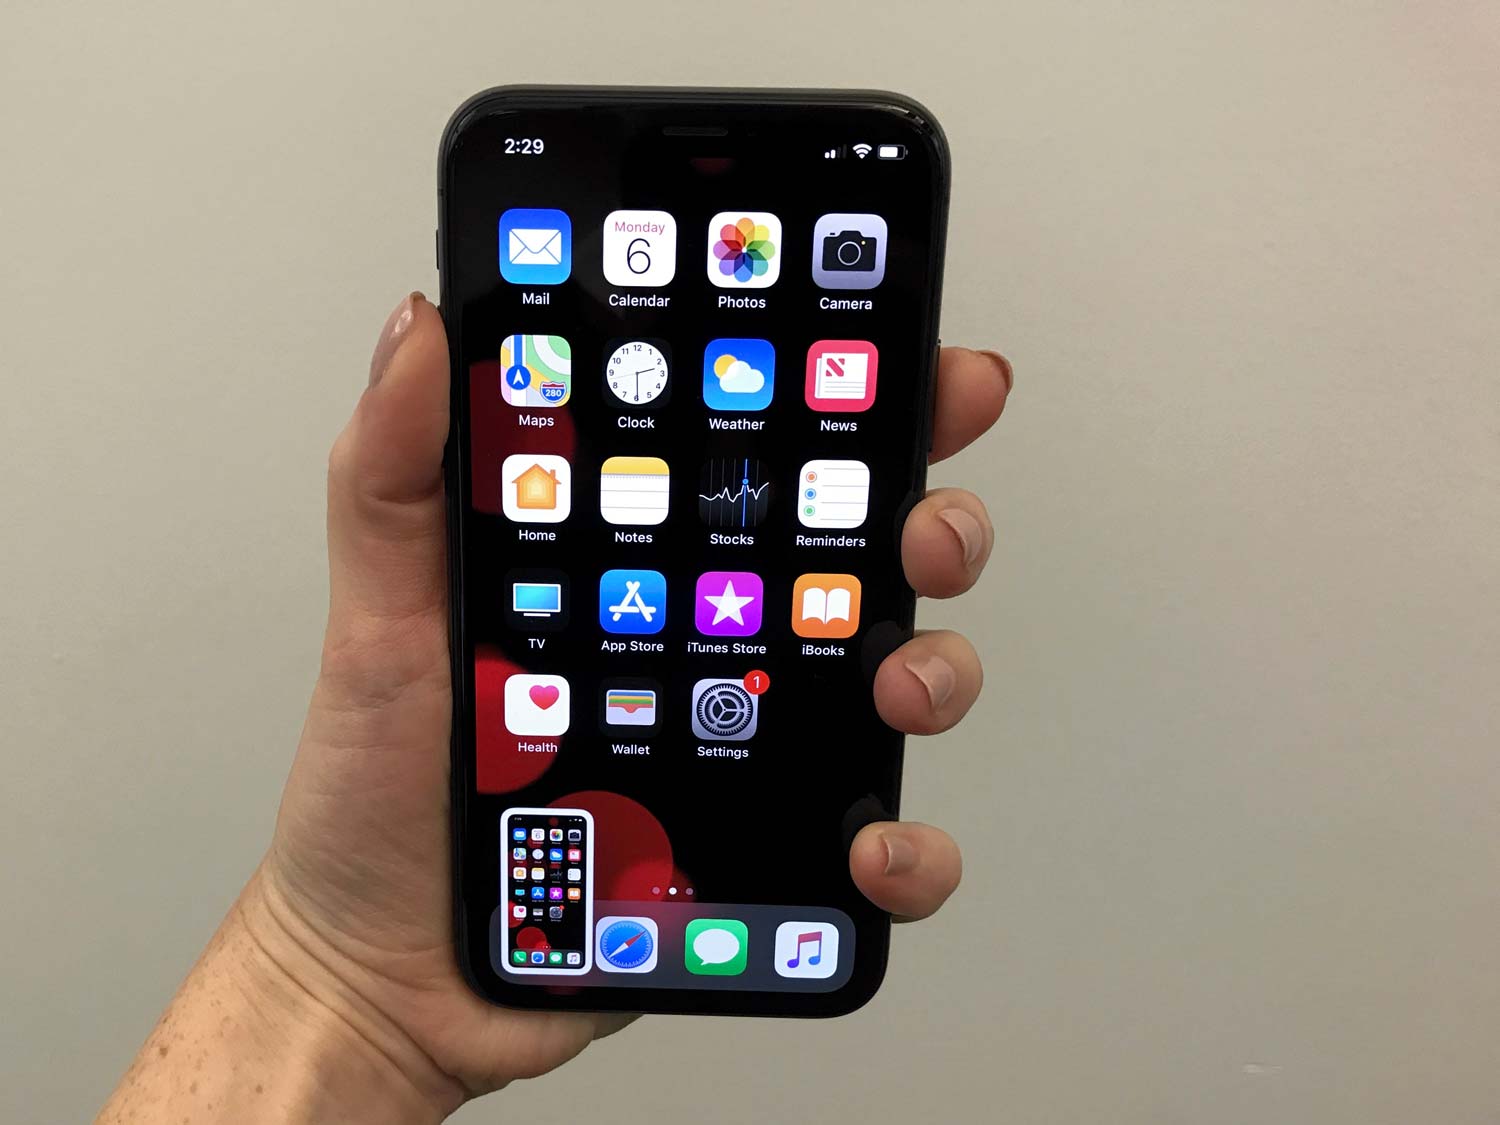 As Apple continues to remove physical buttons from its lineup of devices, taking a screenshot becomes a much tougher task as the button combinations continue to change.